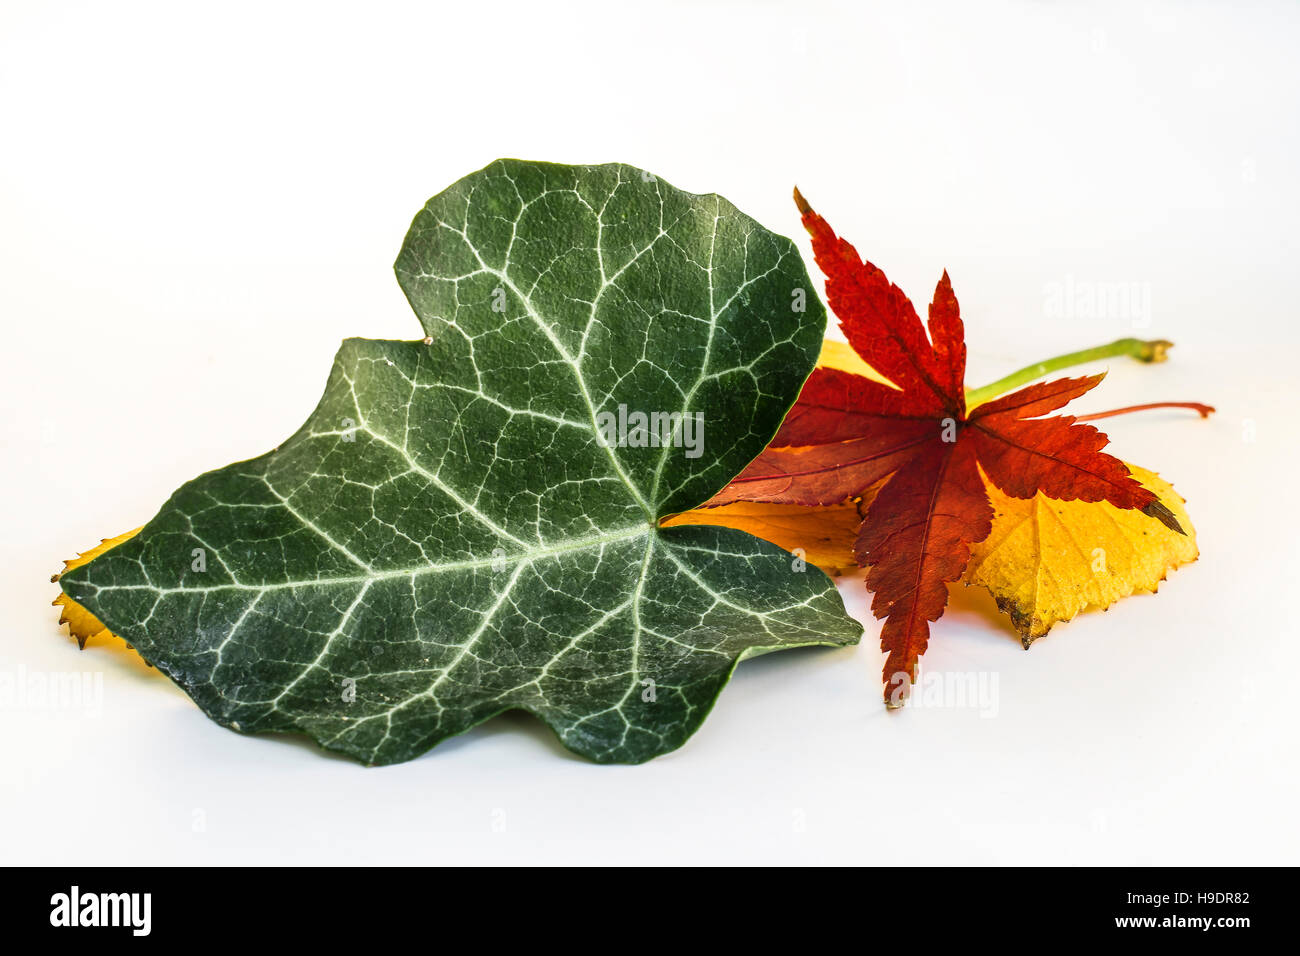 Dry Leaf of Japanese Maple and other Leaves Stock Photo